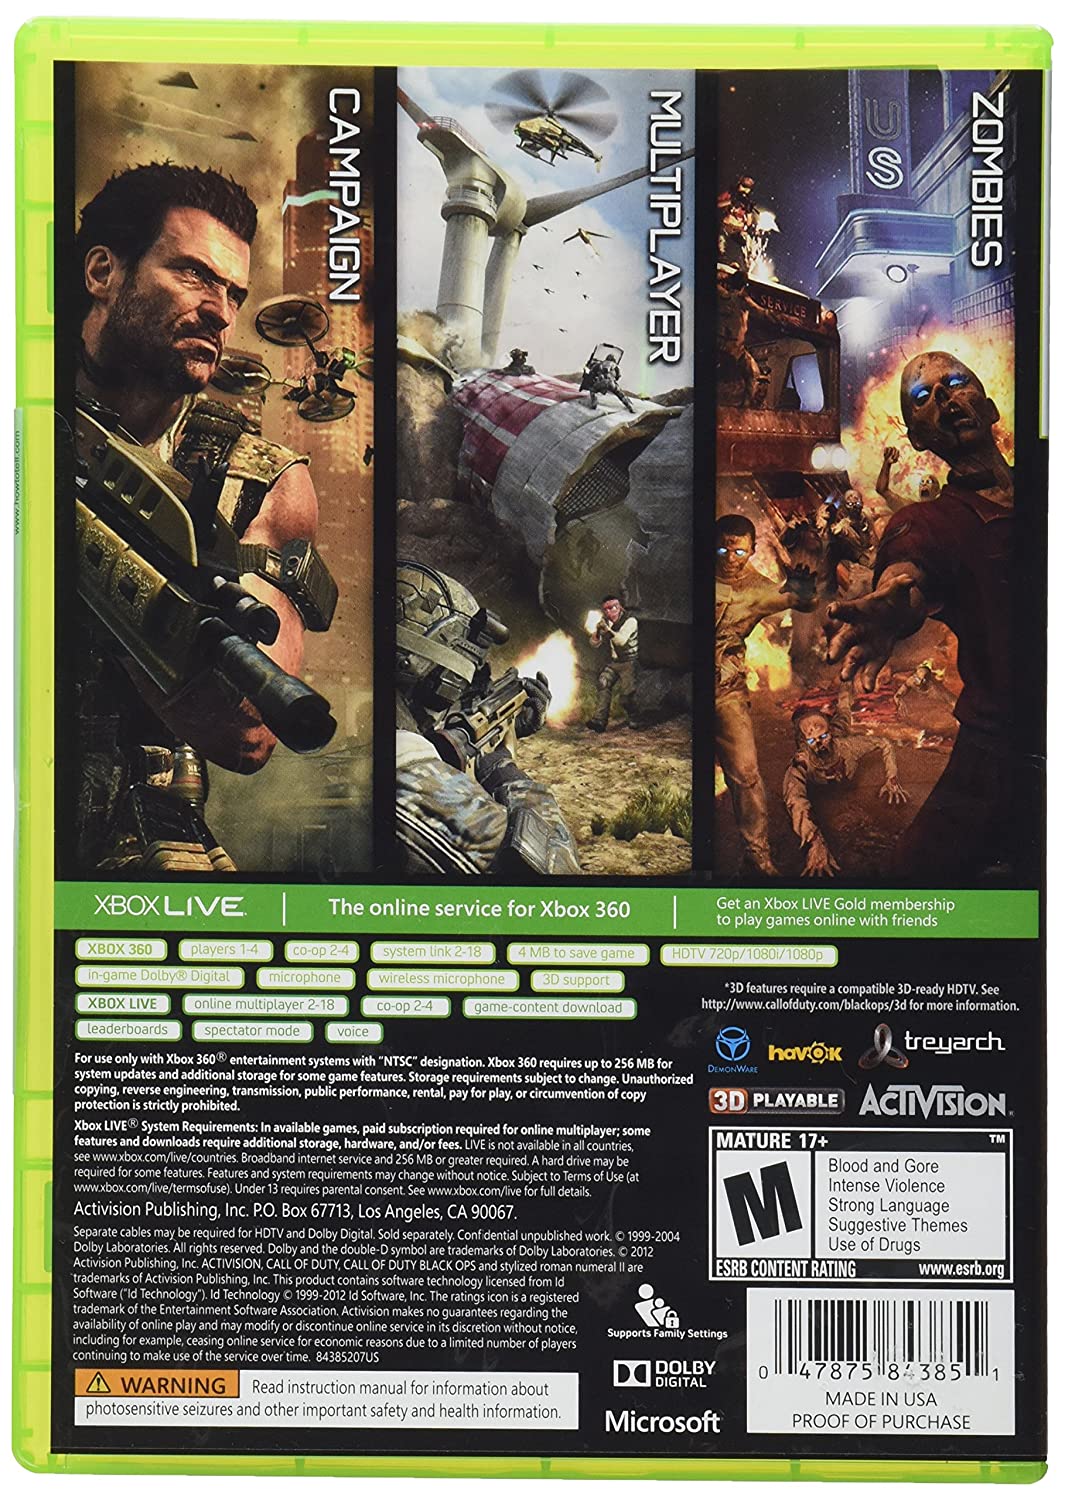 Call of Duty: Black Ops 2 Game of the Year Edition (XBOX 360) - image 3 of 4